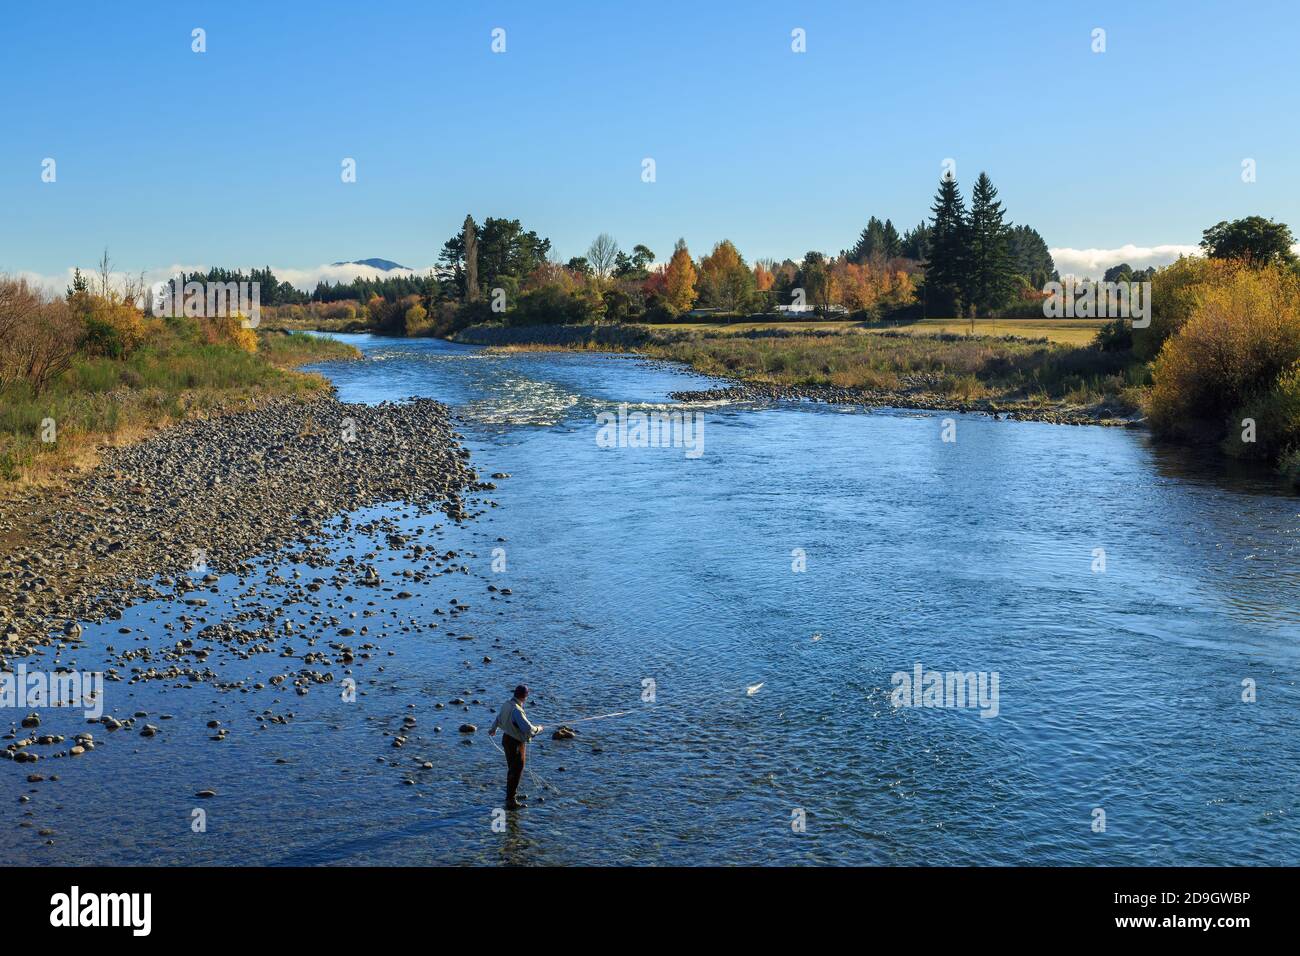 The Tongariro River, New Zealand, in autumn, with a man fishing for trout Stock Photo